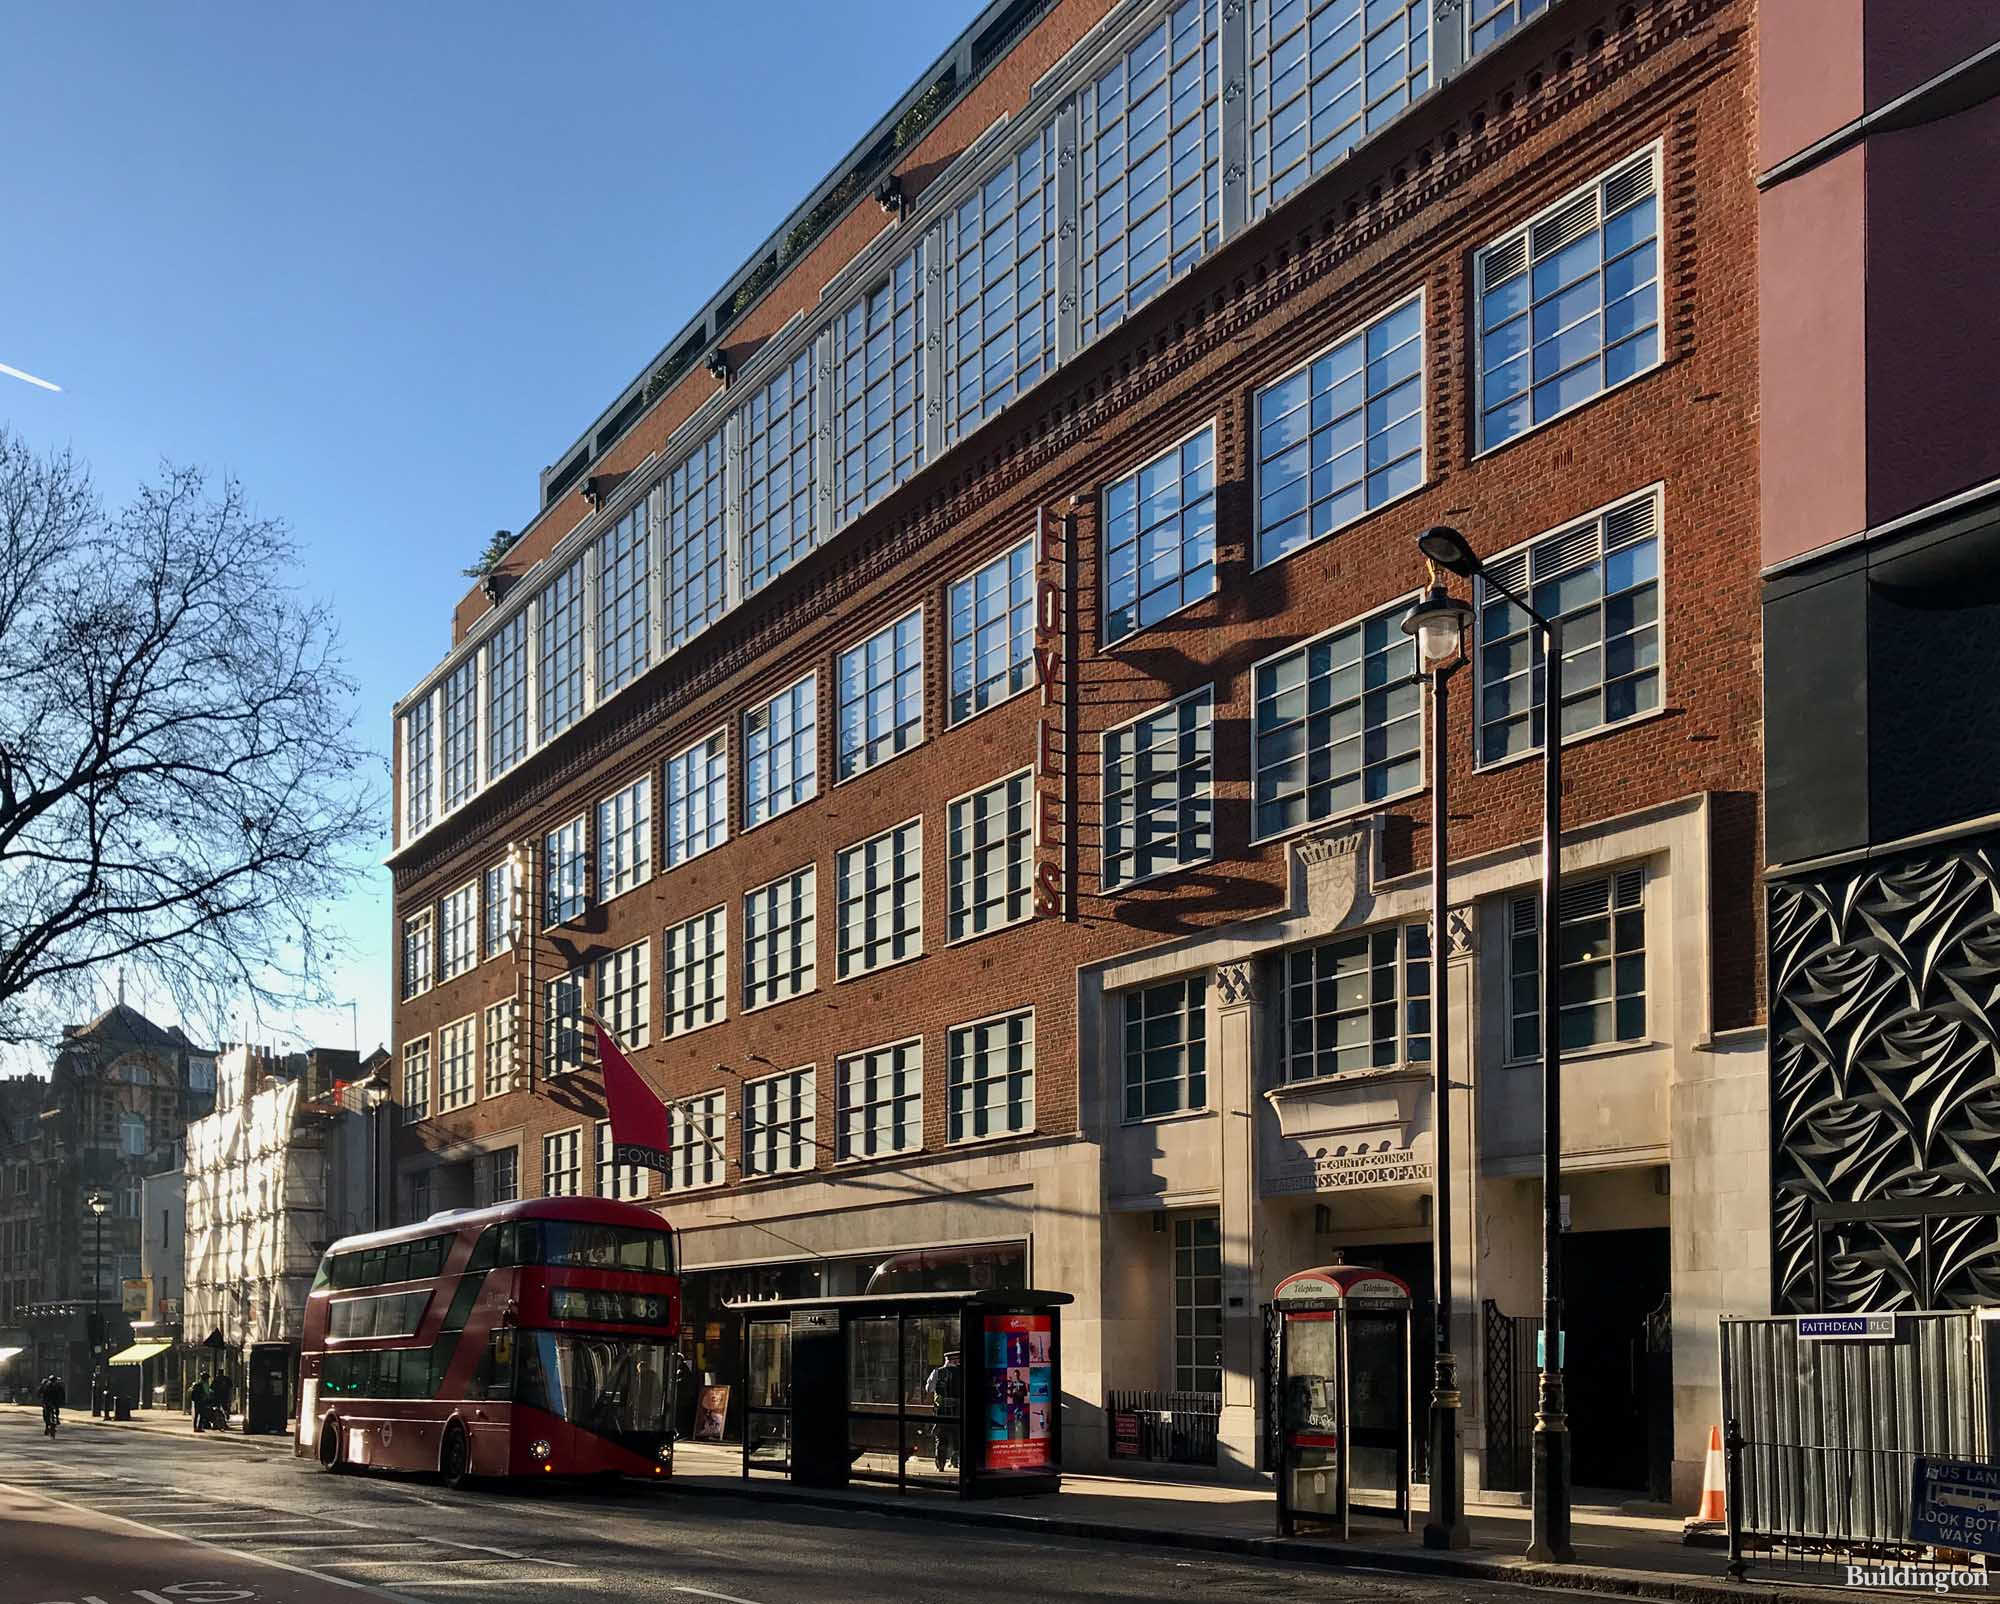 The Saint Martins Lofts at 107-109 Charing Cross Road in London WC2.